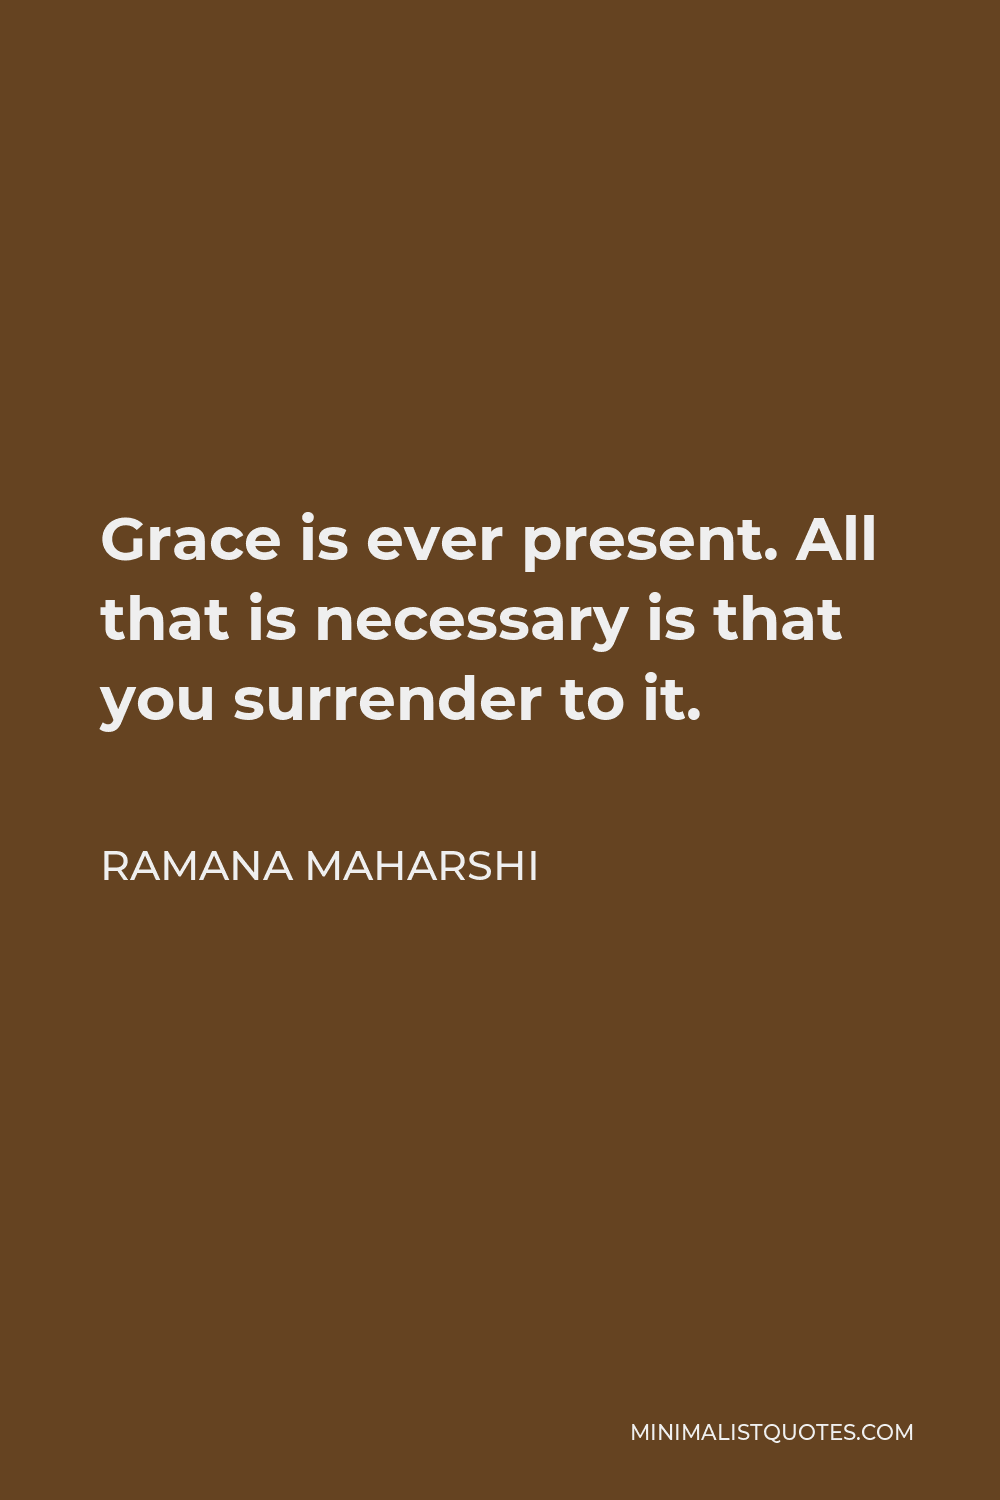 Ramana Maharshi Quote - Grace is ever present. All that is necessary is that you surrender to it.